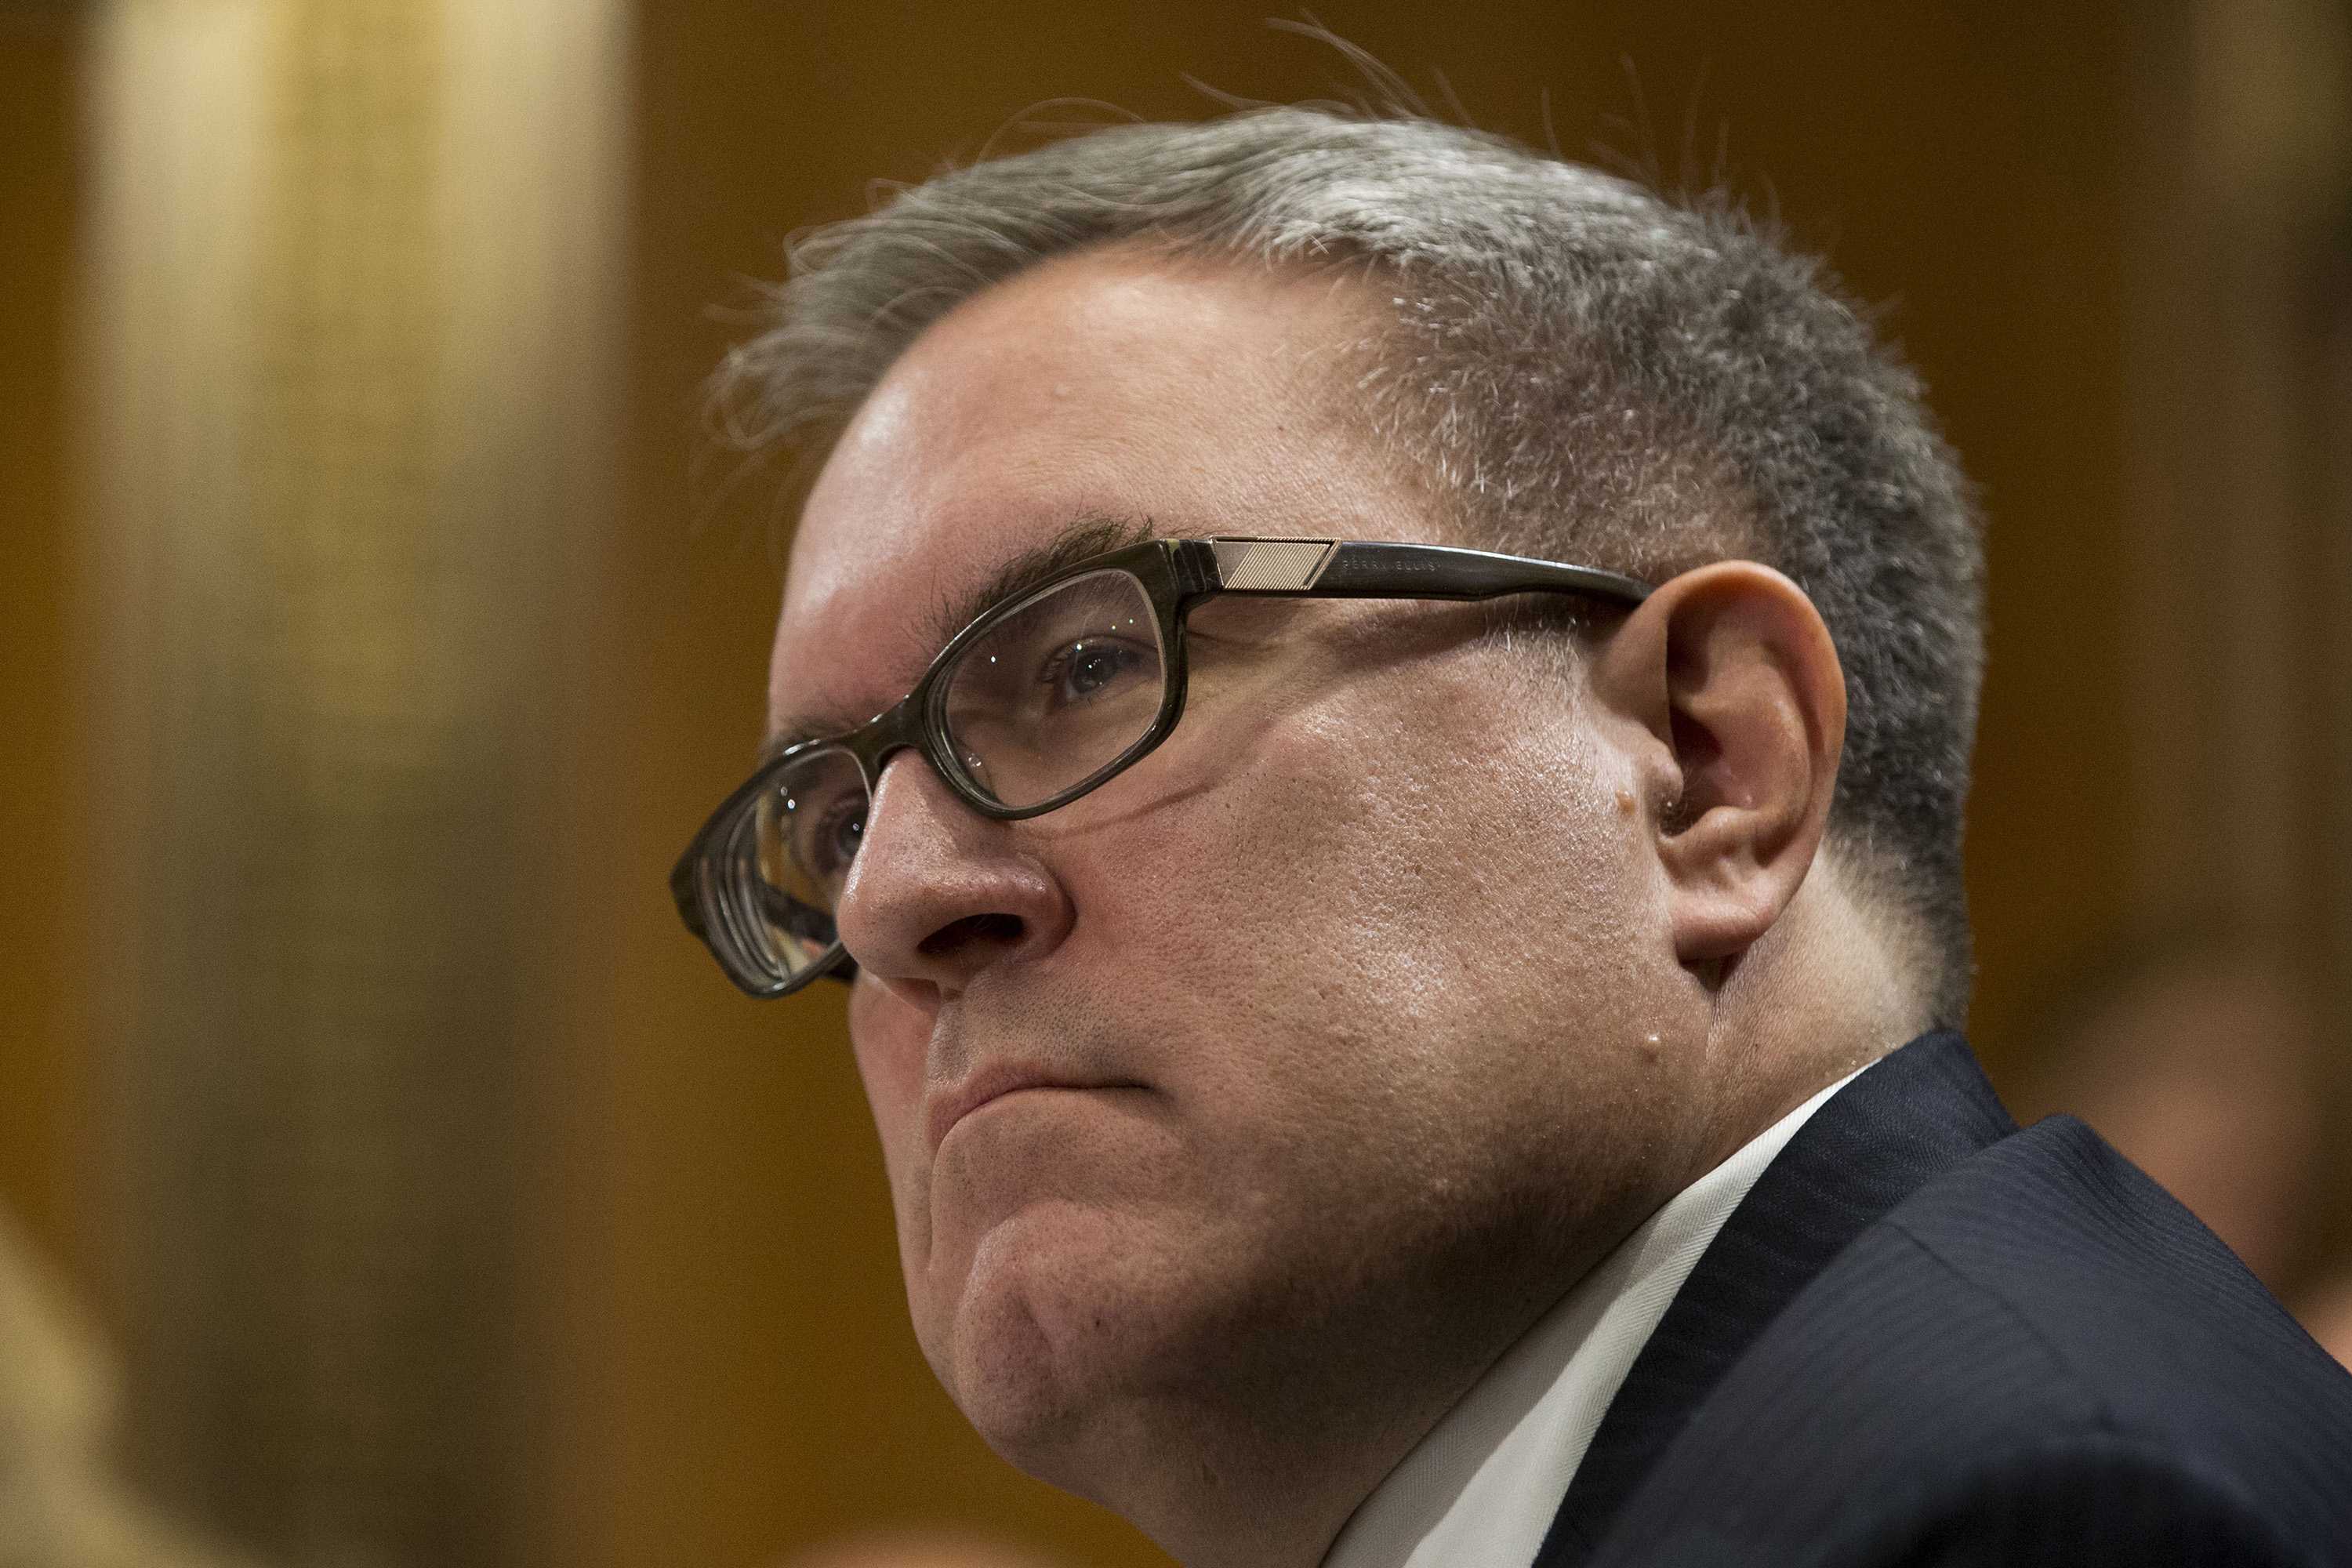 Andrew Wheeler during his confirmation hearing to be Deputy Administrator of the Environmental Protection Agency before the United States Senate Committee on the Environment and Public Works on Capitol Hill on Nov. 8, 2017 in Washington, D.C. (Alex Edelman/CNP/Zuma Press/TNS)